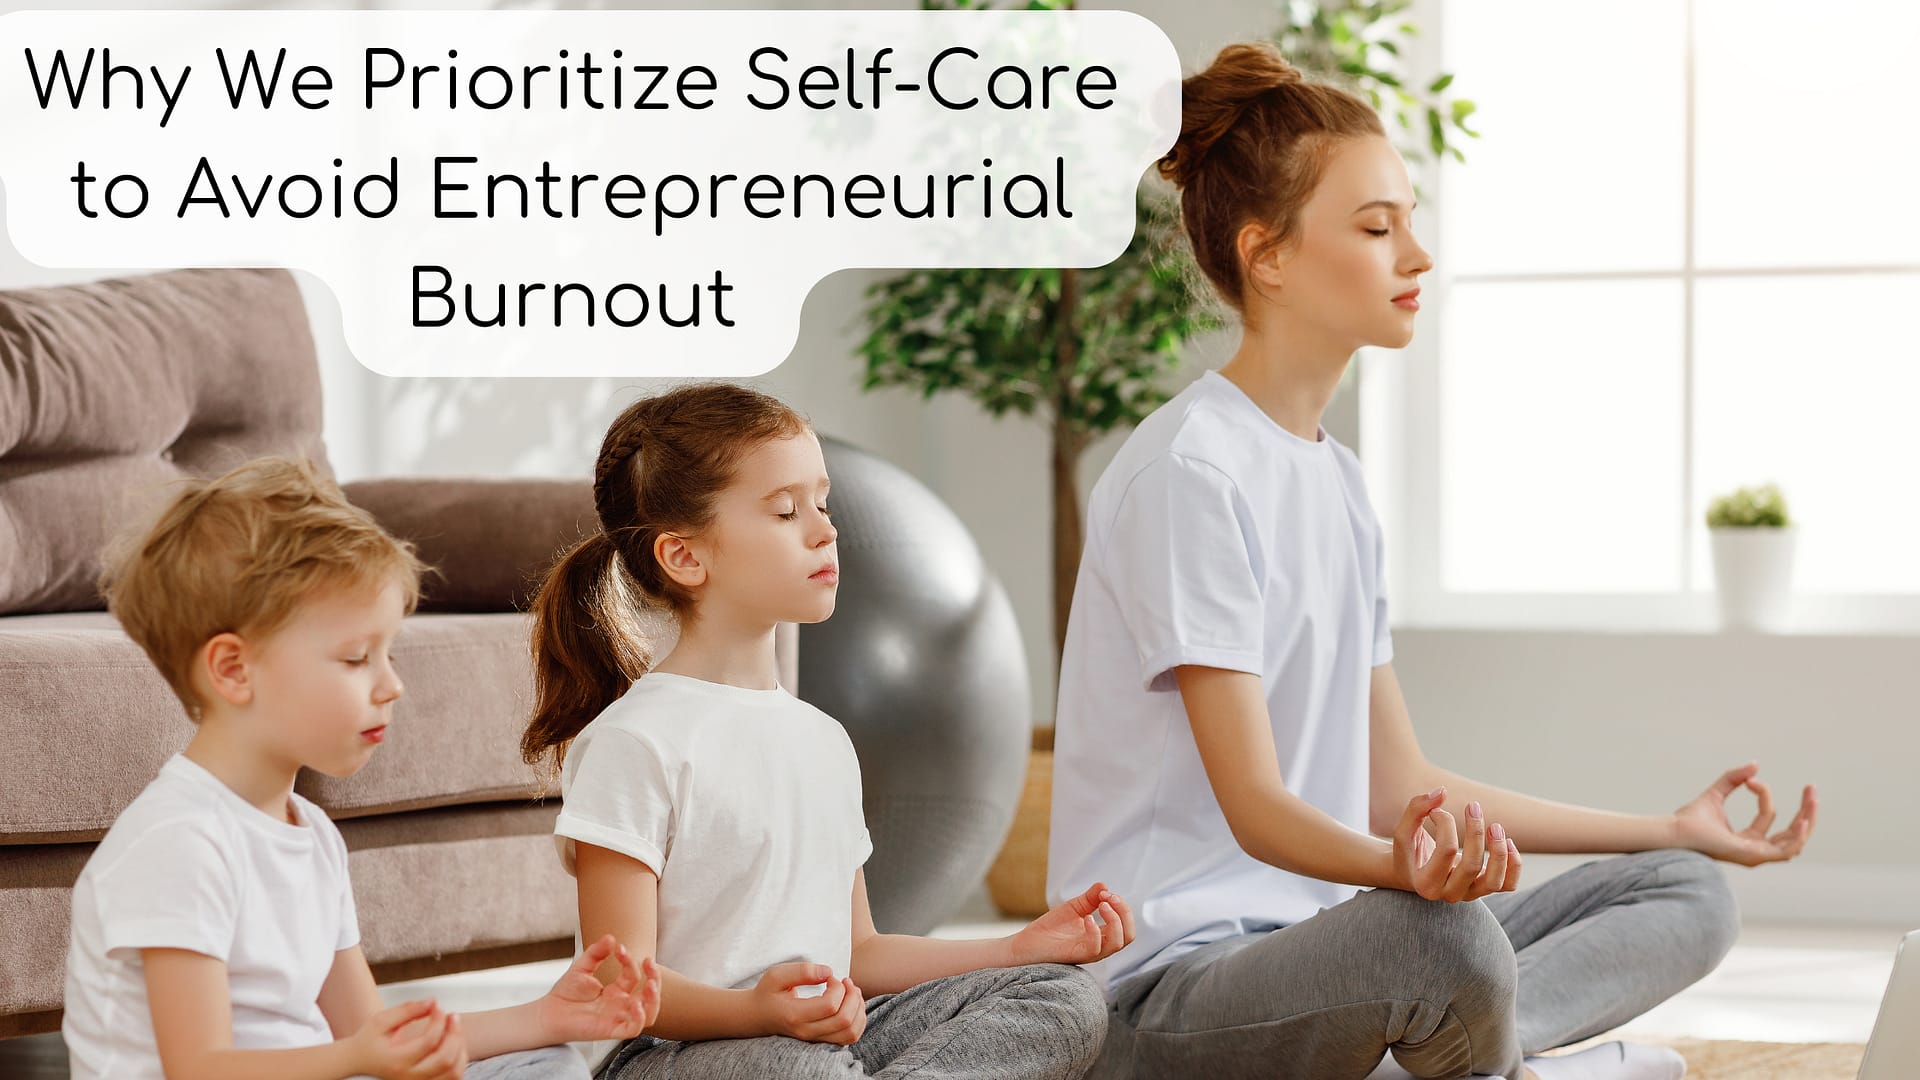 Why We Prioritize Self-Care to Avoid Entrepreneurial Burnout